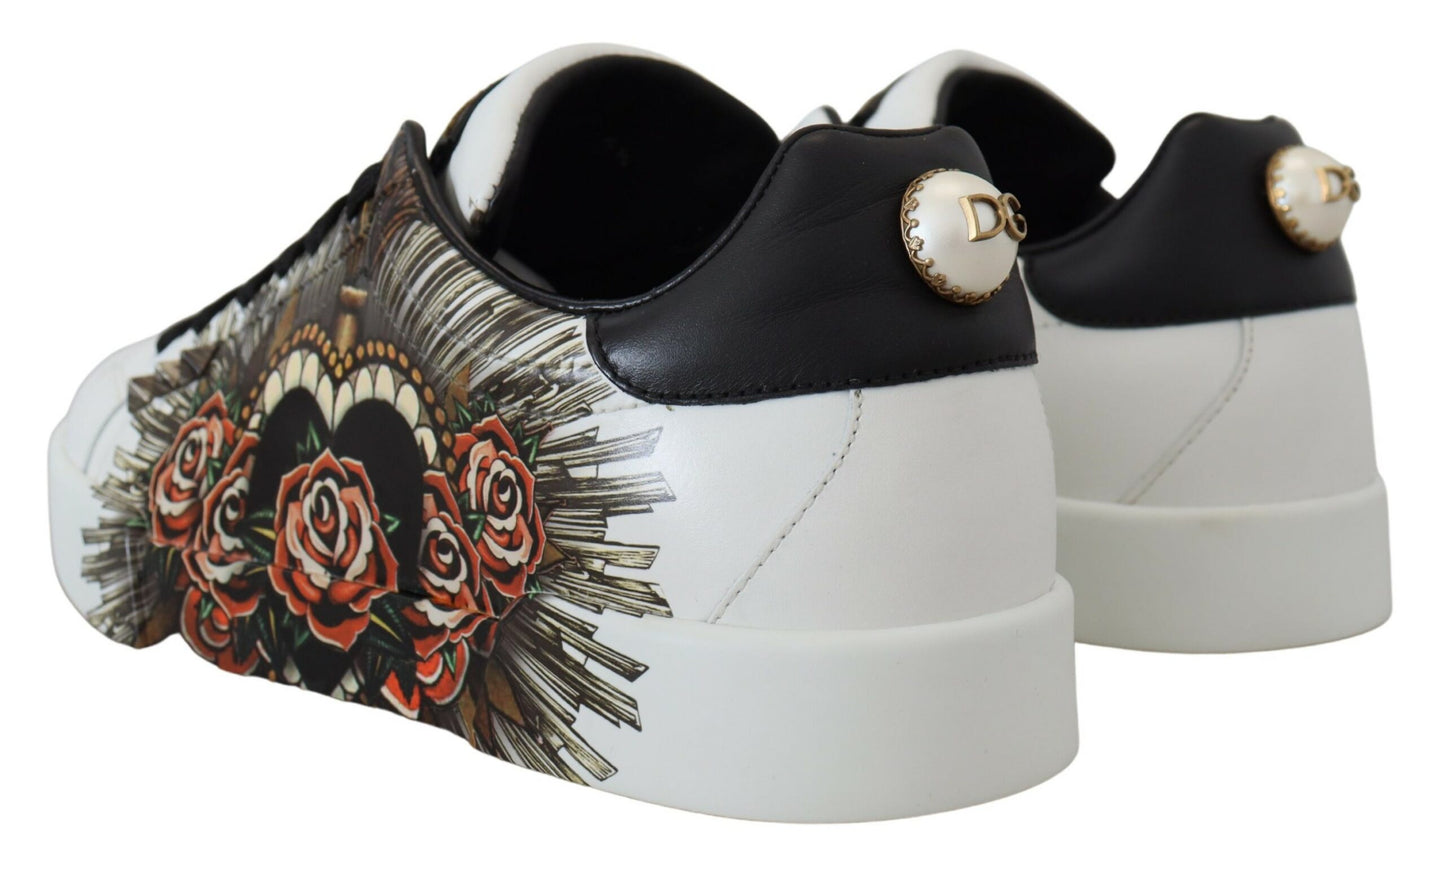 Elegant White Leather Sneakers with Heart Roses Detail